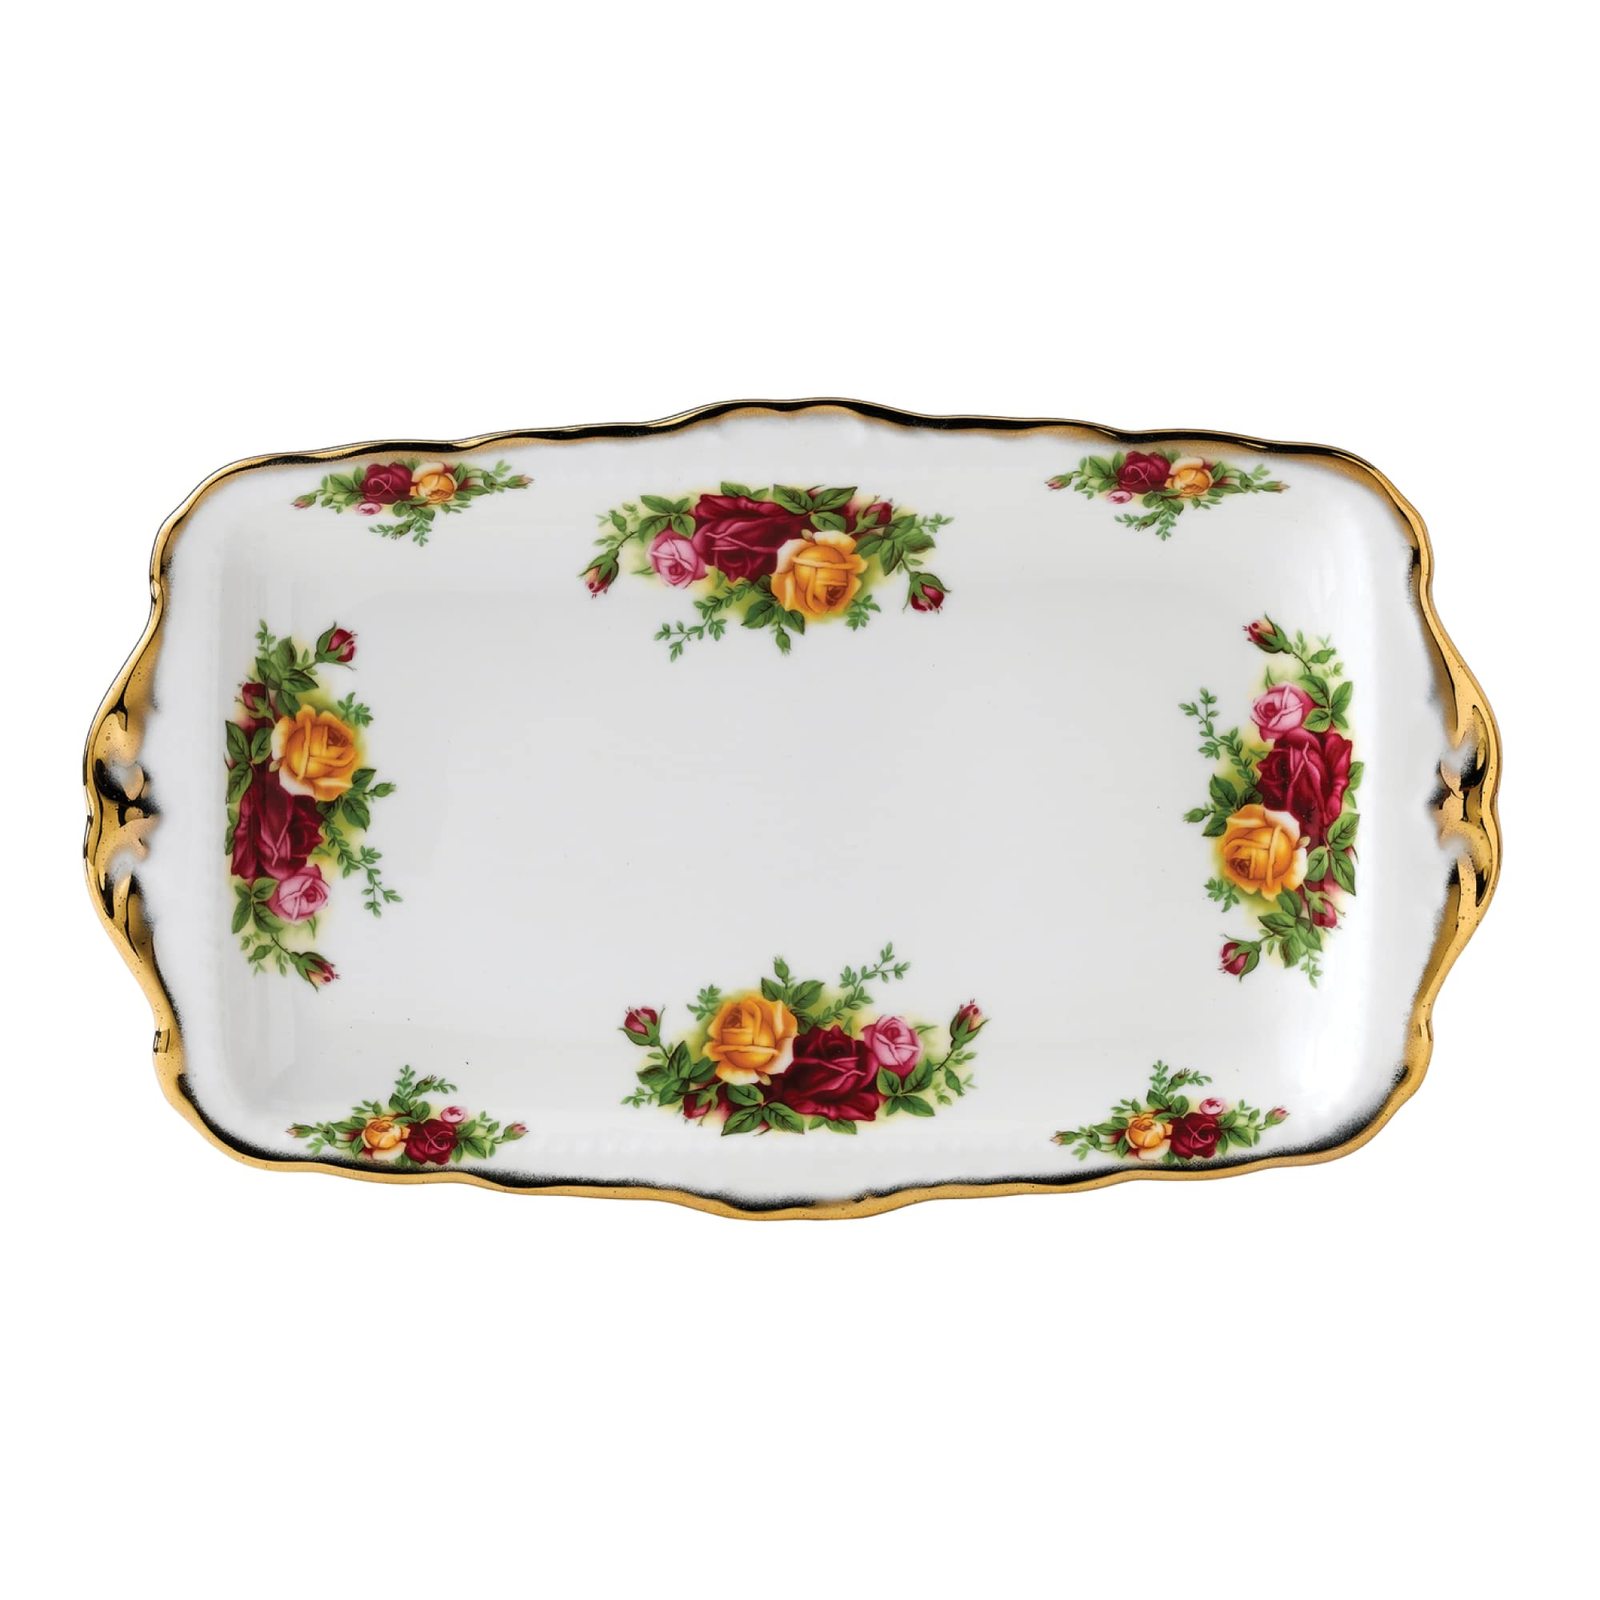 Primary image for Royal Albert Old Country Roses 5-Piece Place Setting, Multi